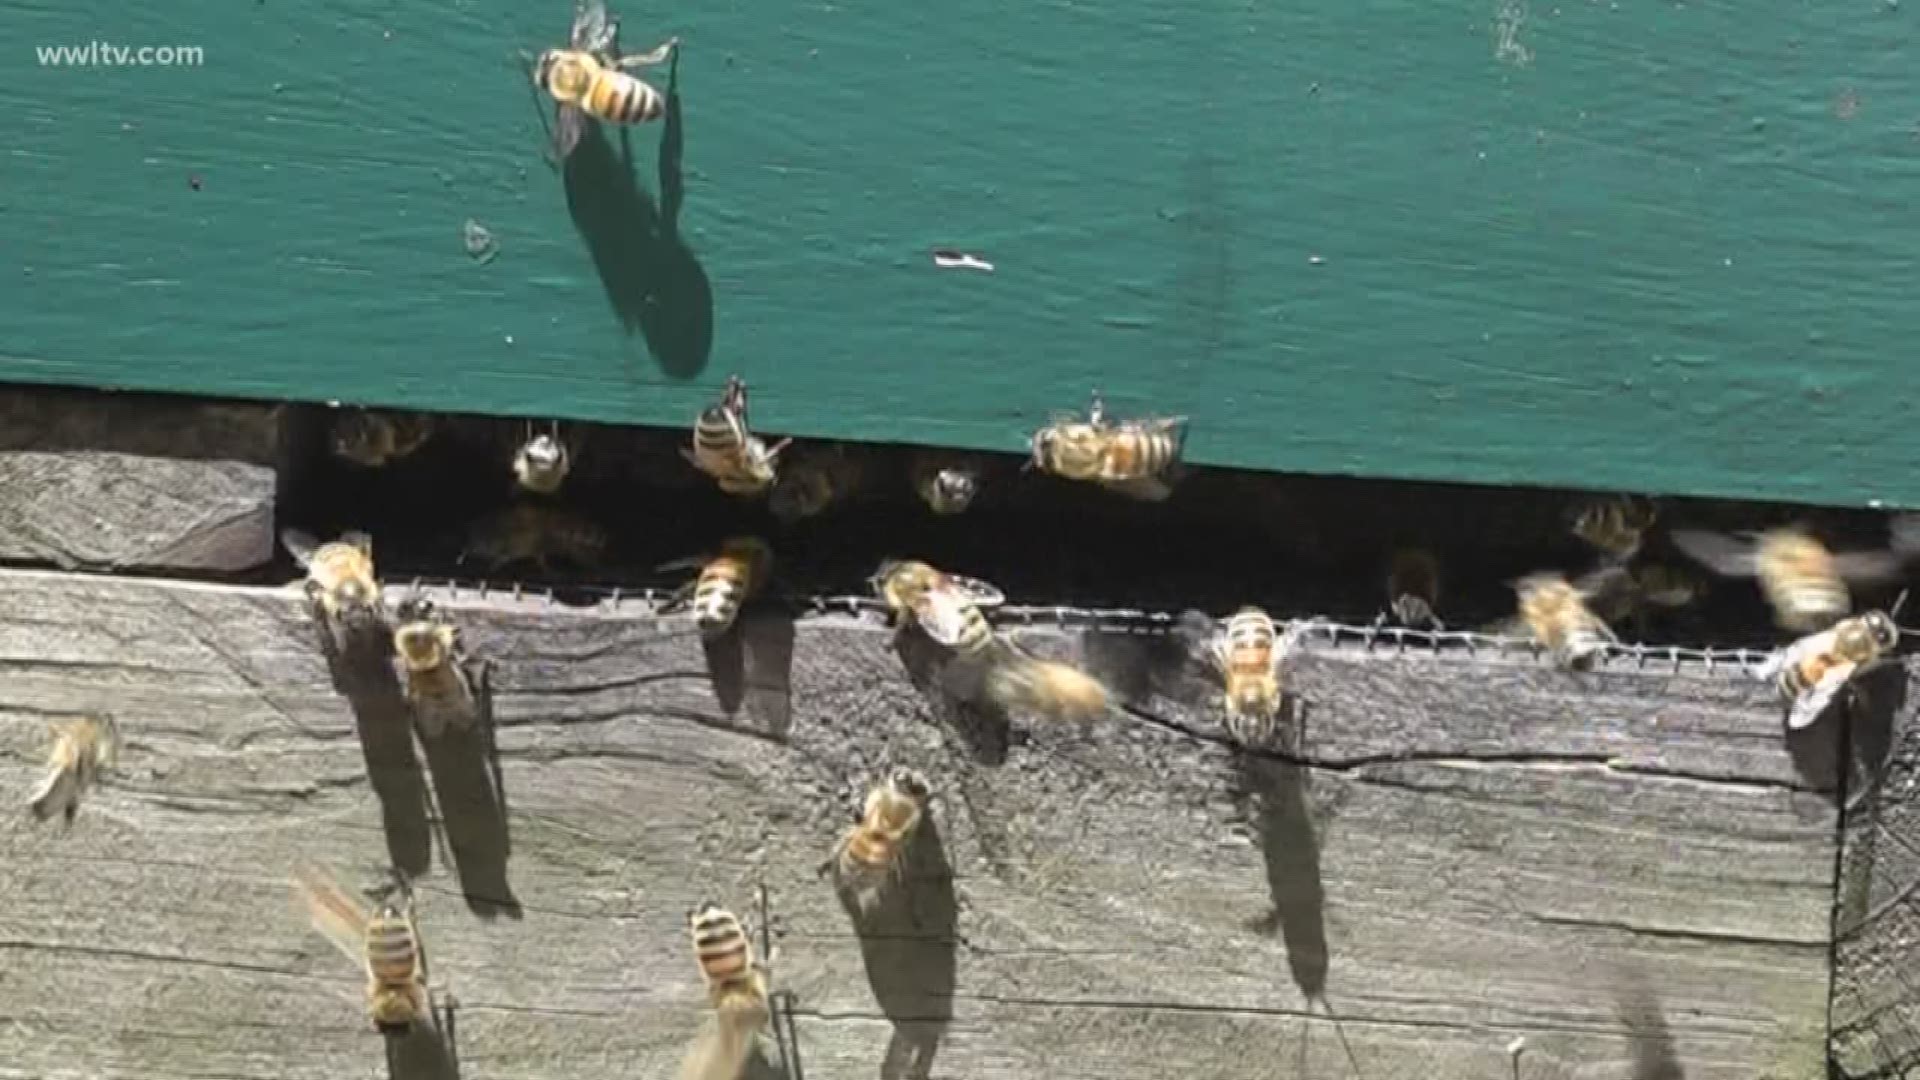 It's a sticky situation on the Northshore after a beekeeper realized his bees were missing.